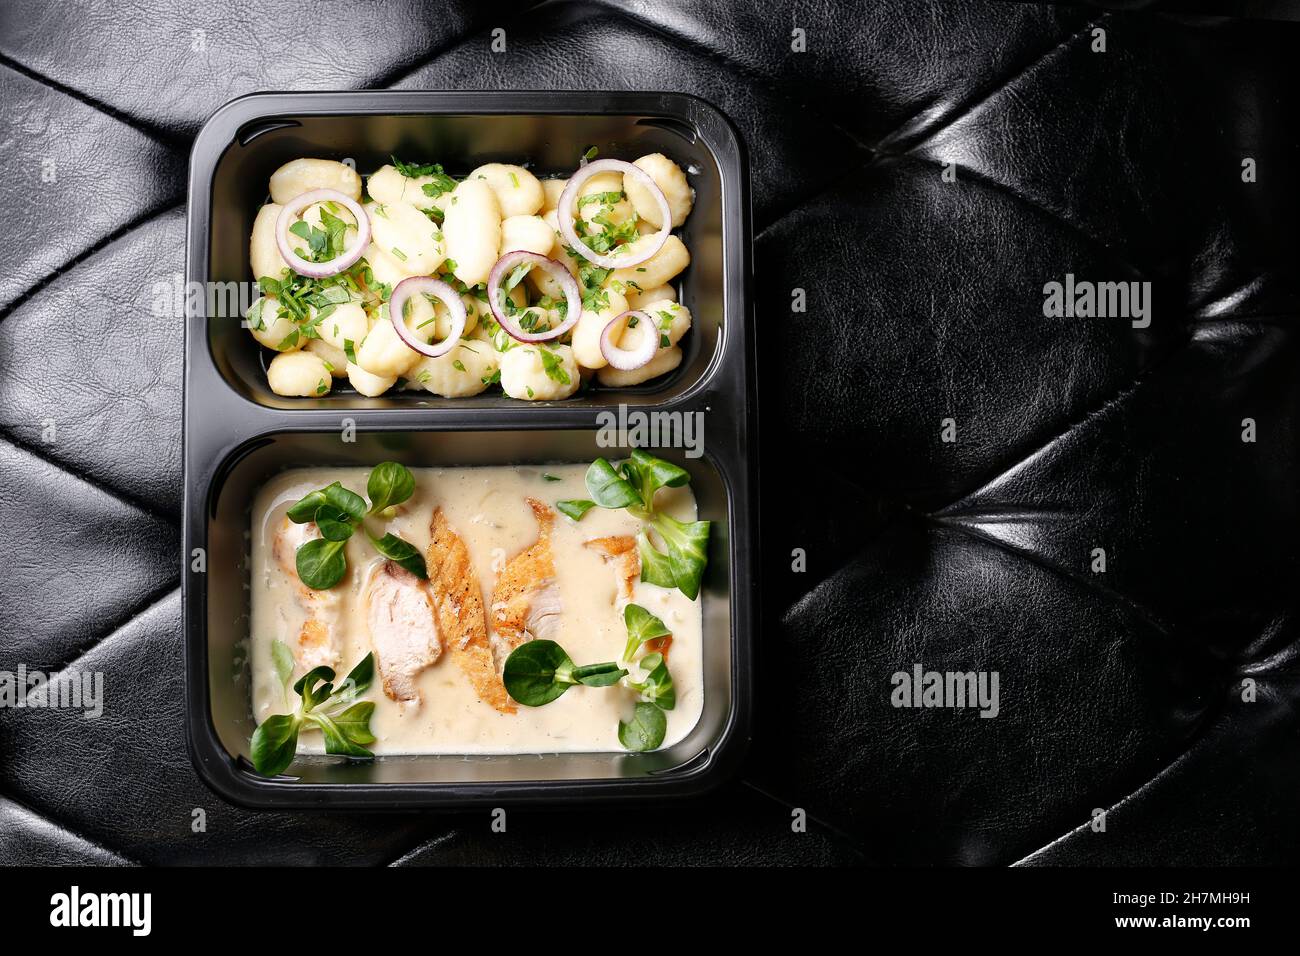 Gnocchi with chicken fillet boiled in cheese sauce. Dinner lunch box. Takeaway, diet box. Appetizing ready-to-go dish served in a disposable box. Cul Stock Photo